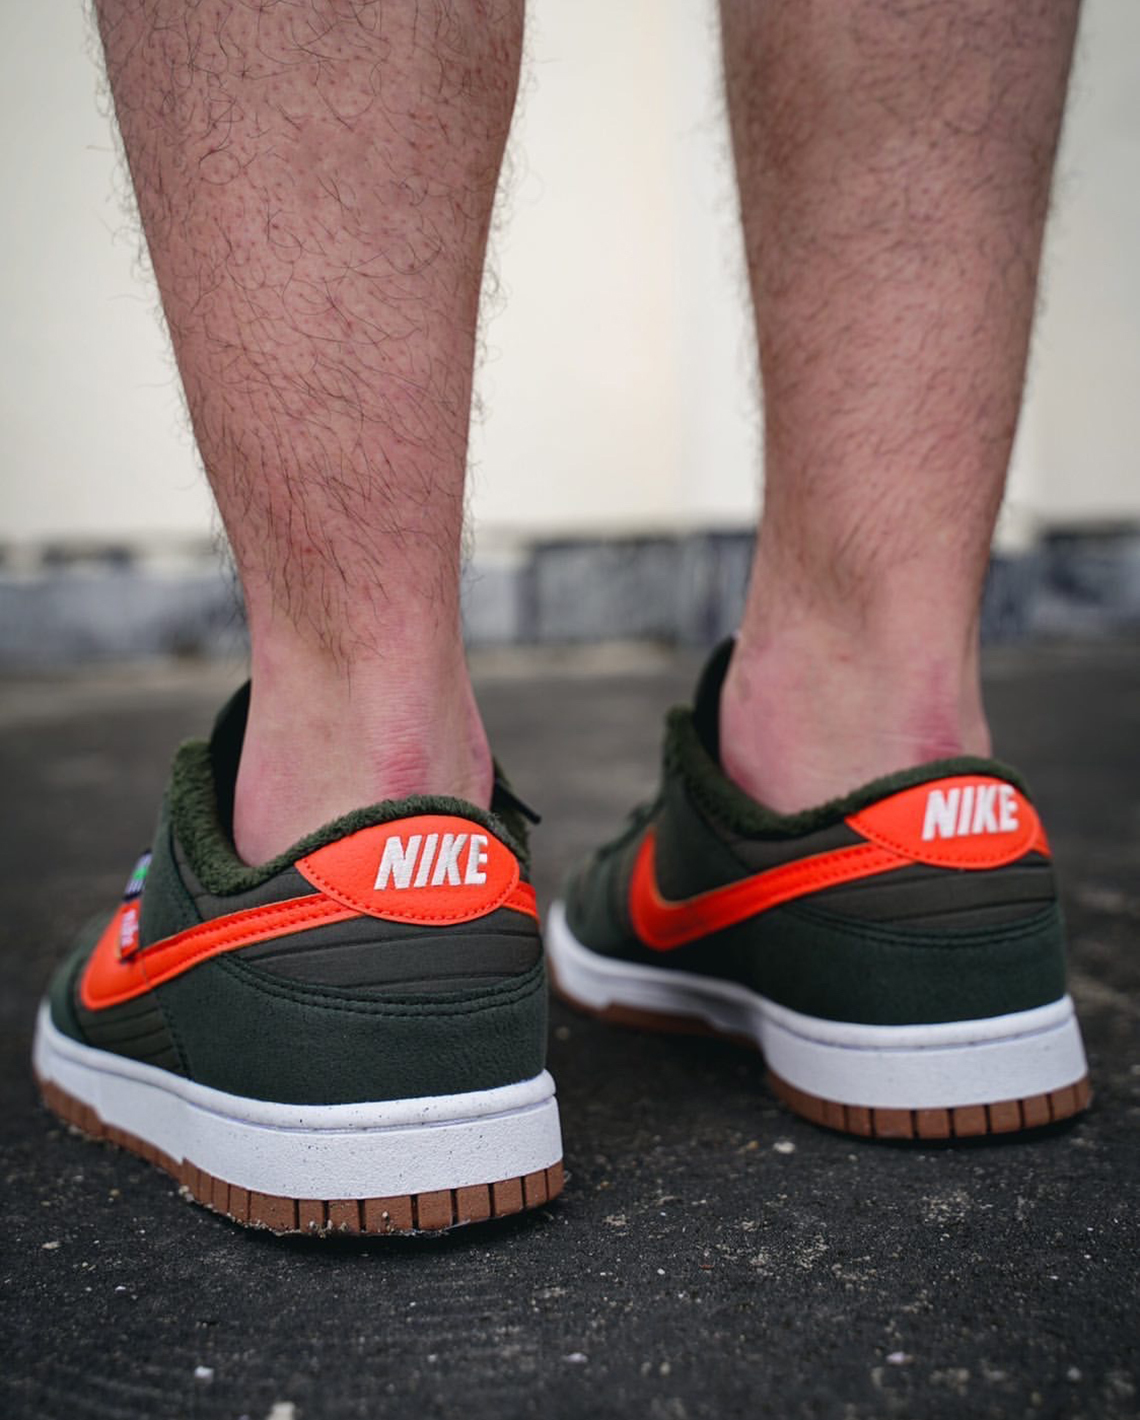 hinh-anh-chi-tiet-ve-nike-dunk-low-toasty